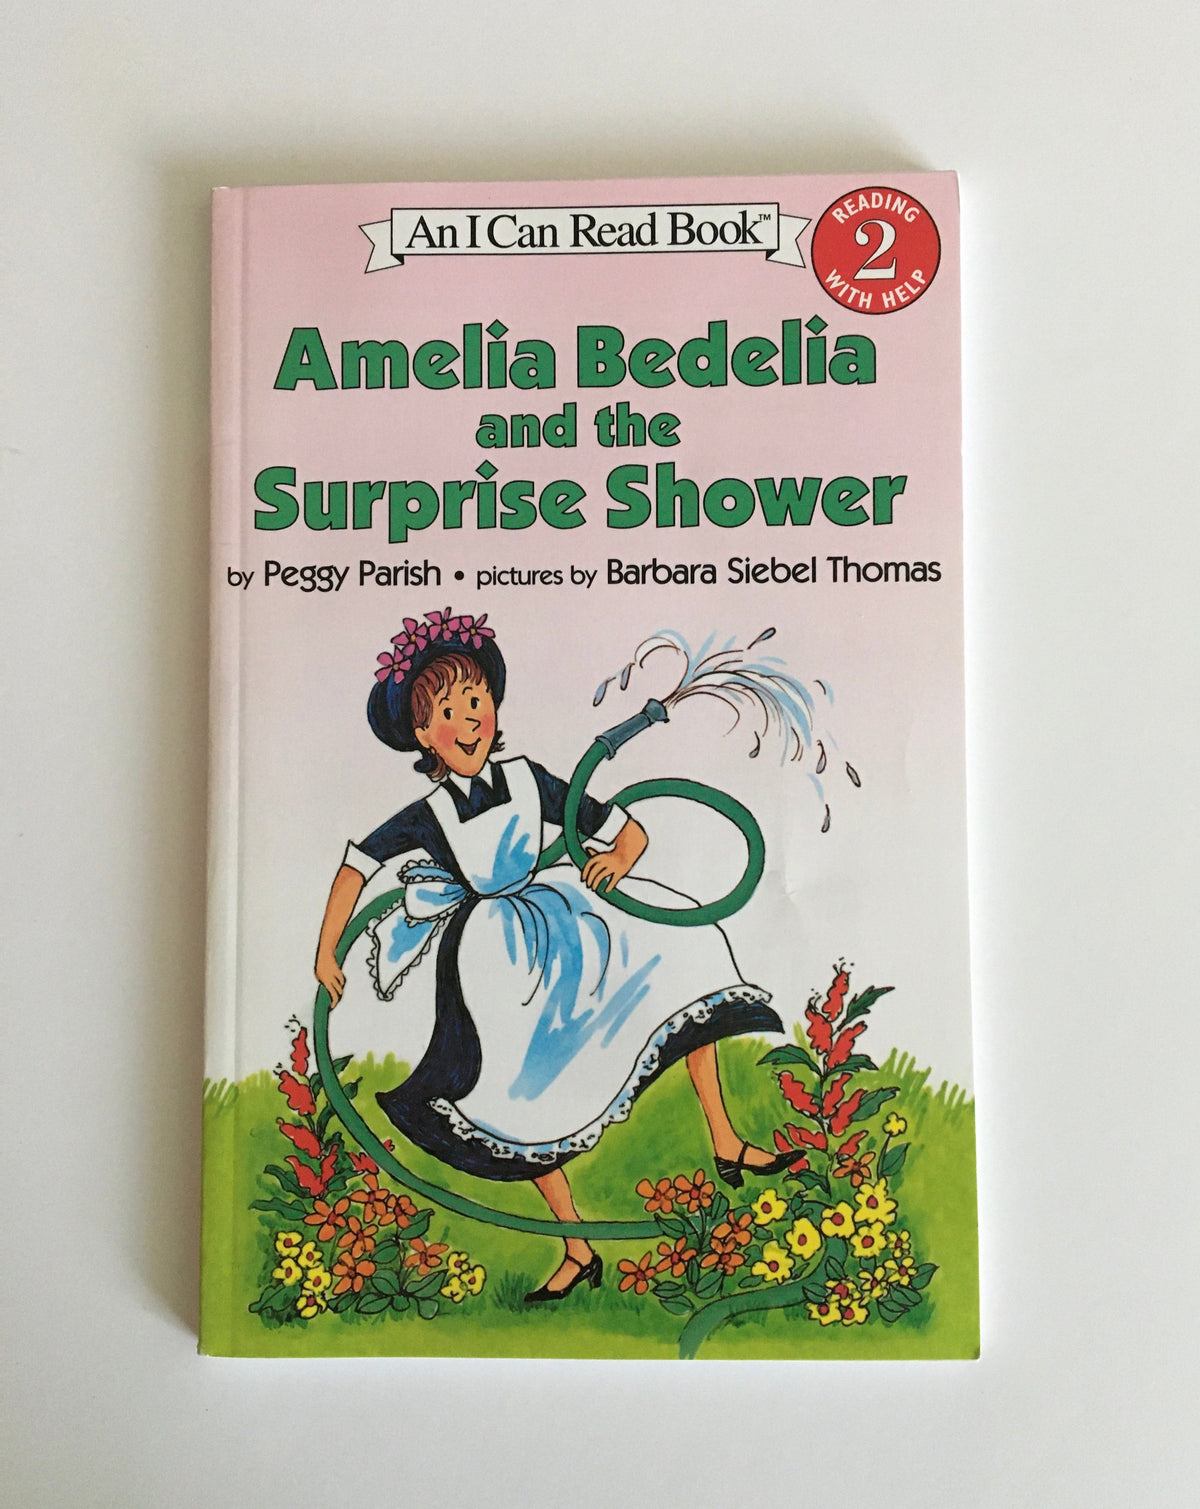 Amelia Bedilia and the Surprise Shower by Peggy Parish